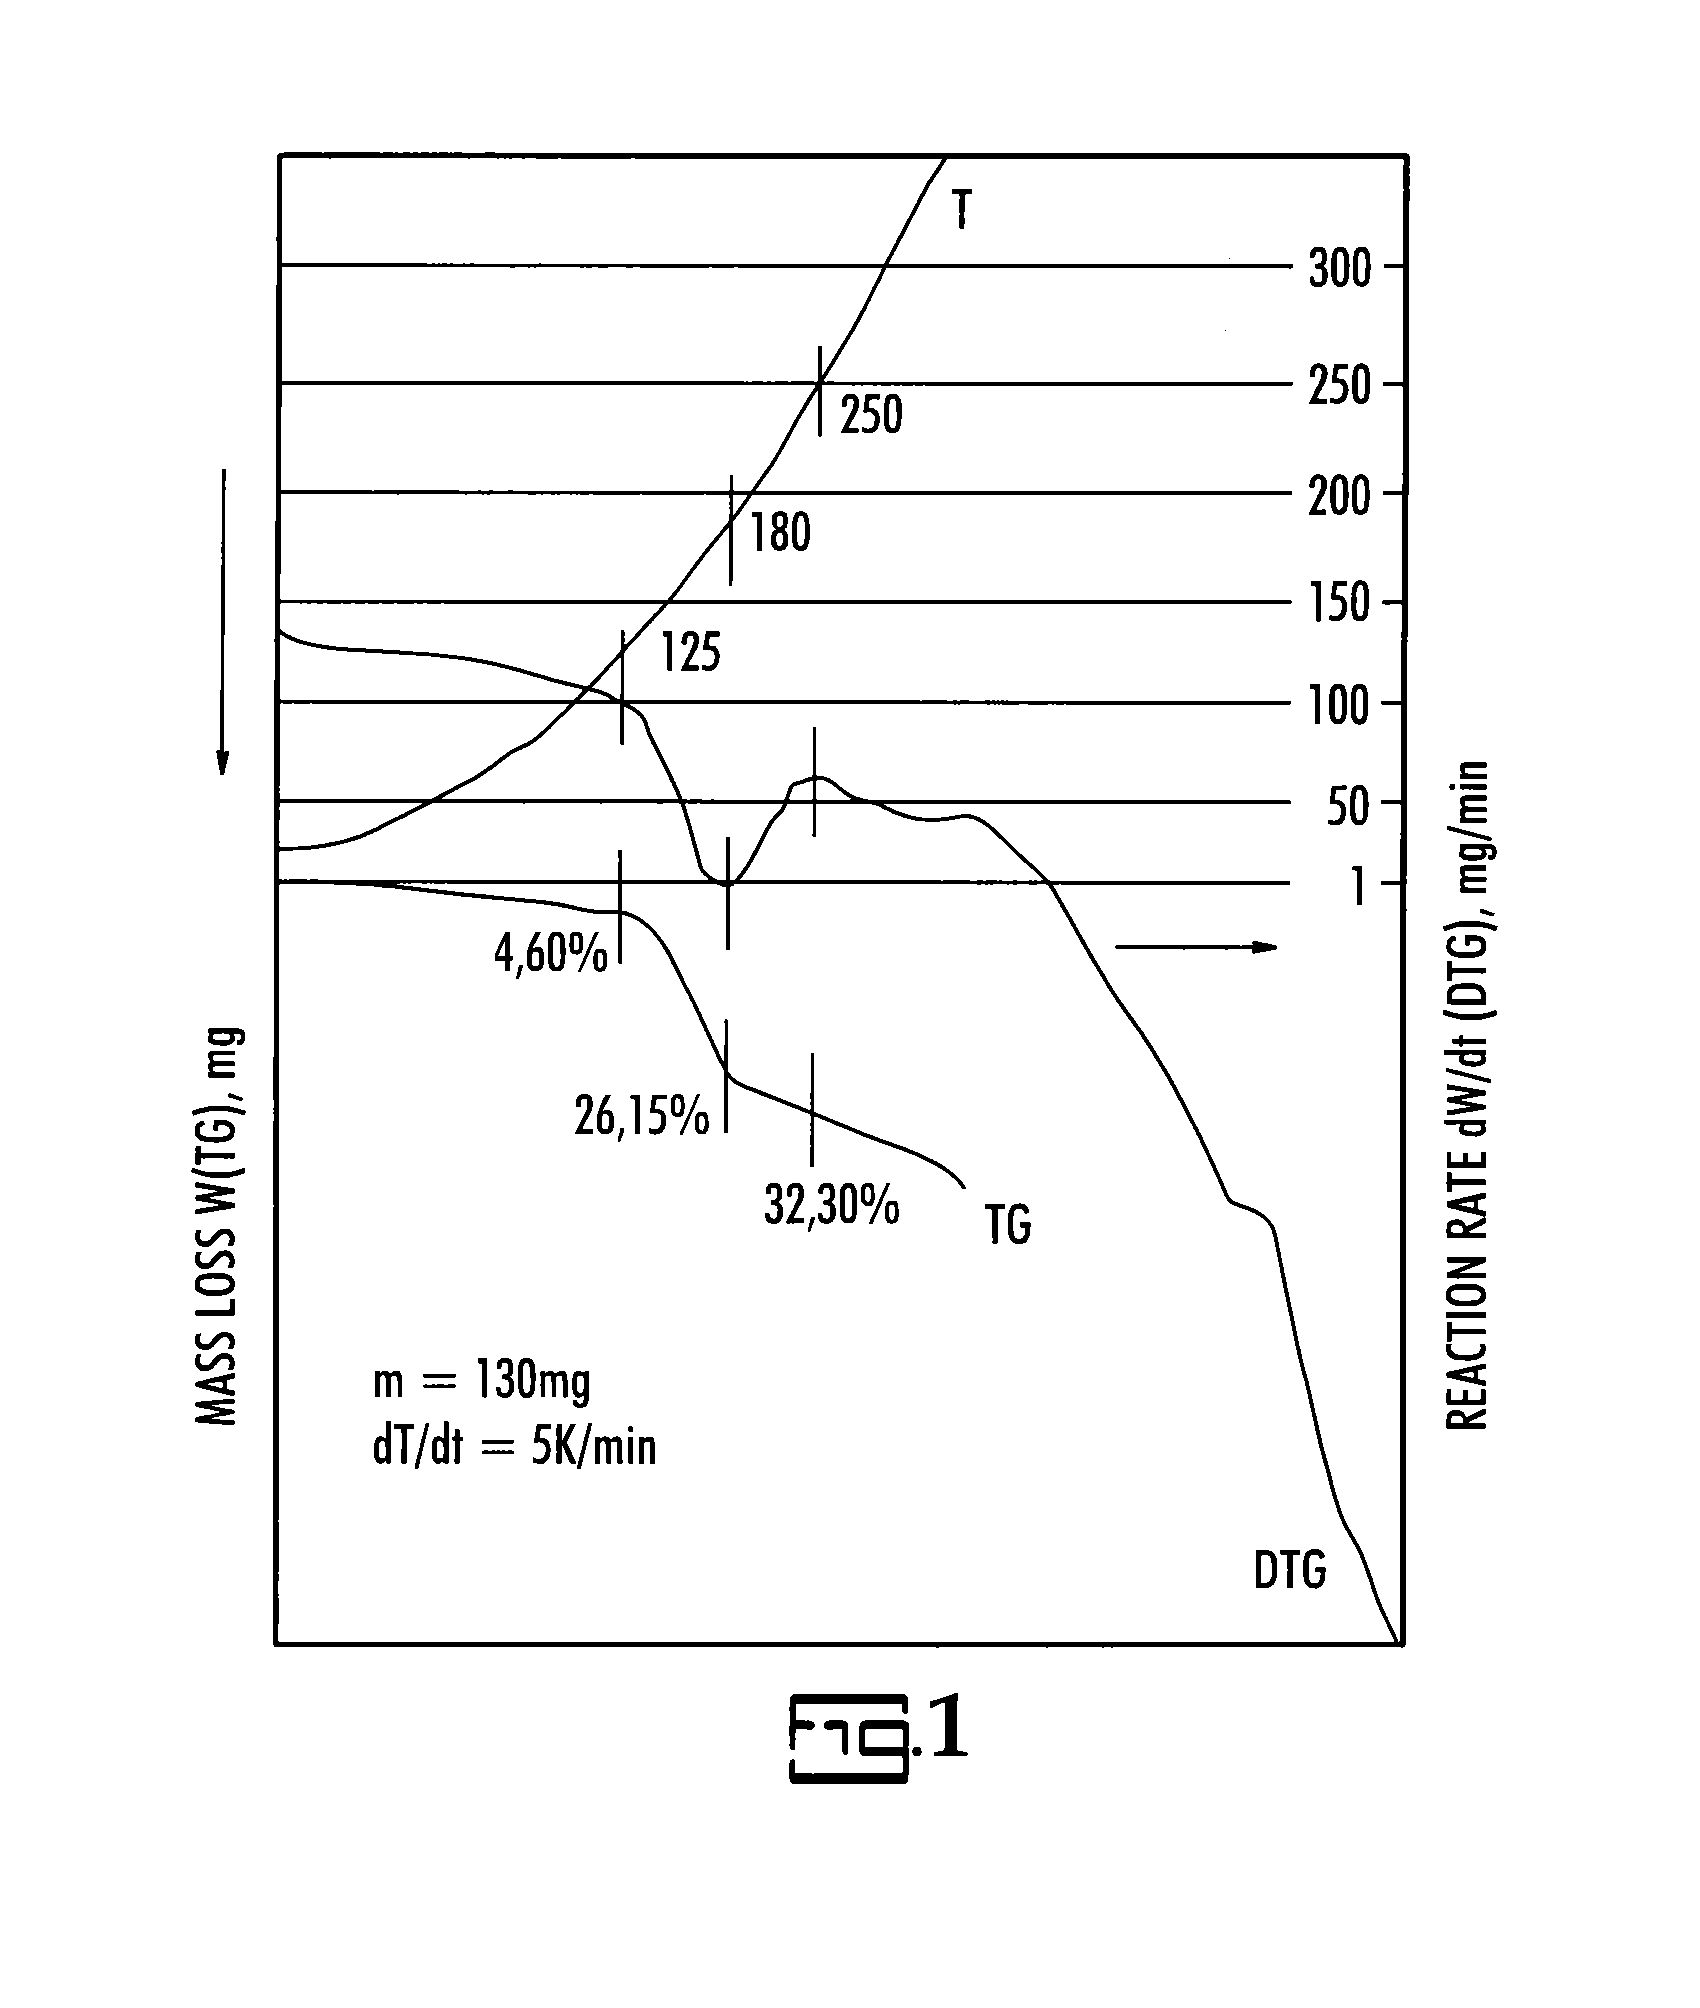 Biodegradable halogen-free flame retardants composition and methods for use